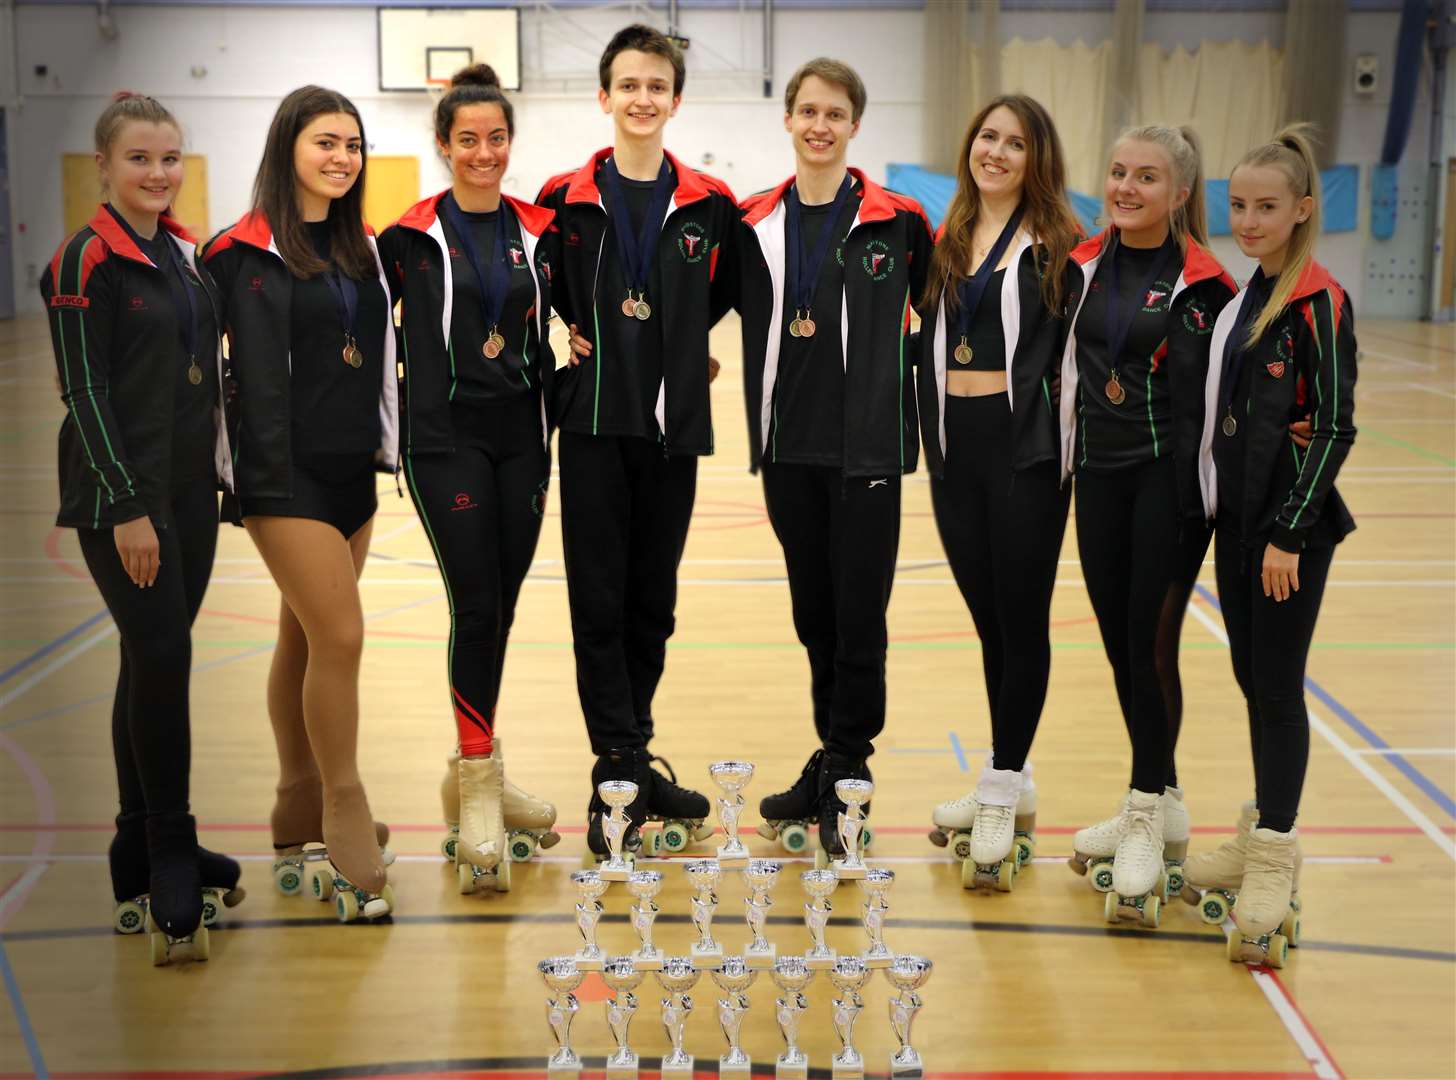 Success for Maidstone Roller Dance Club in Kettering